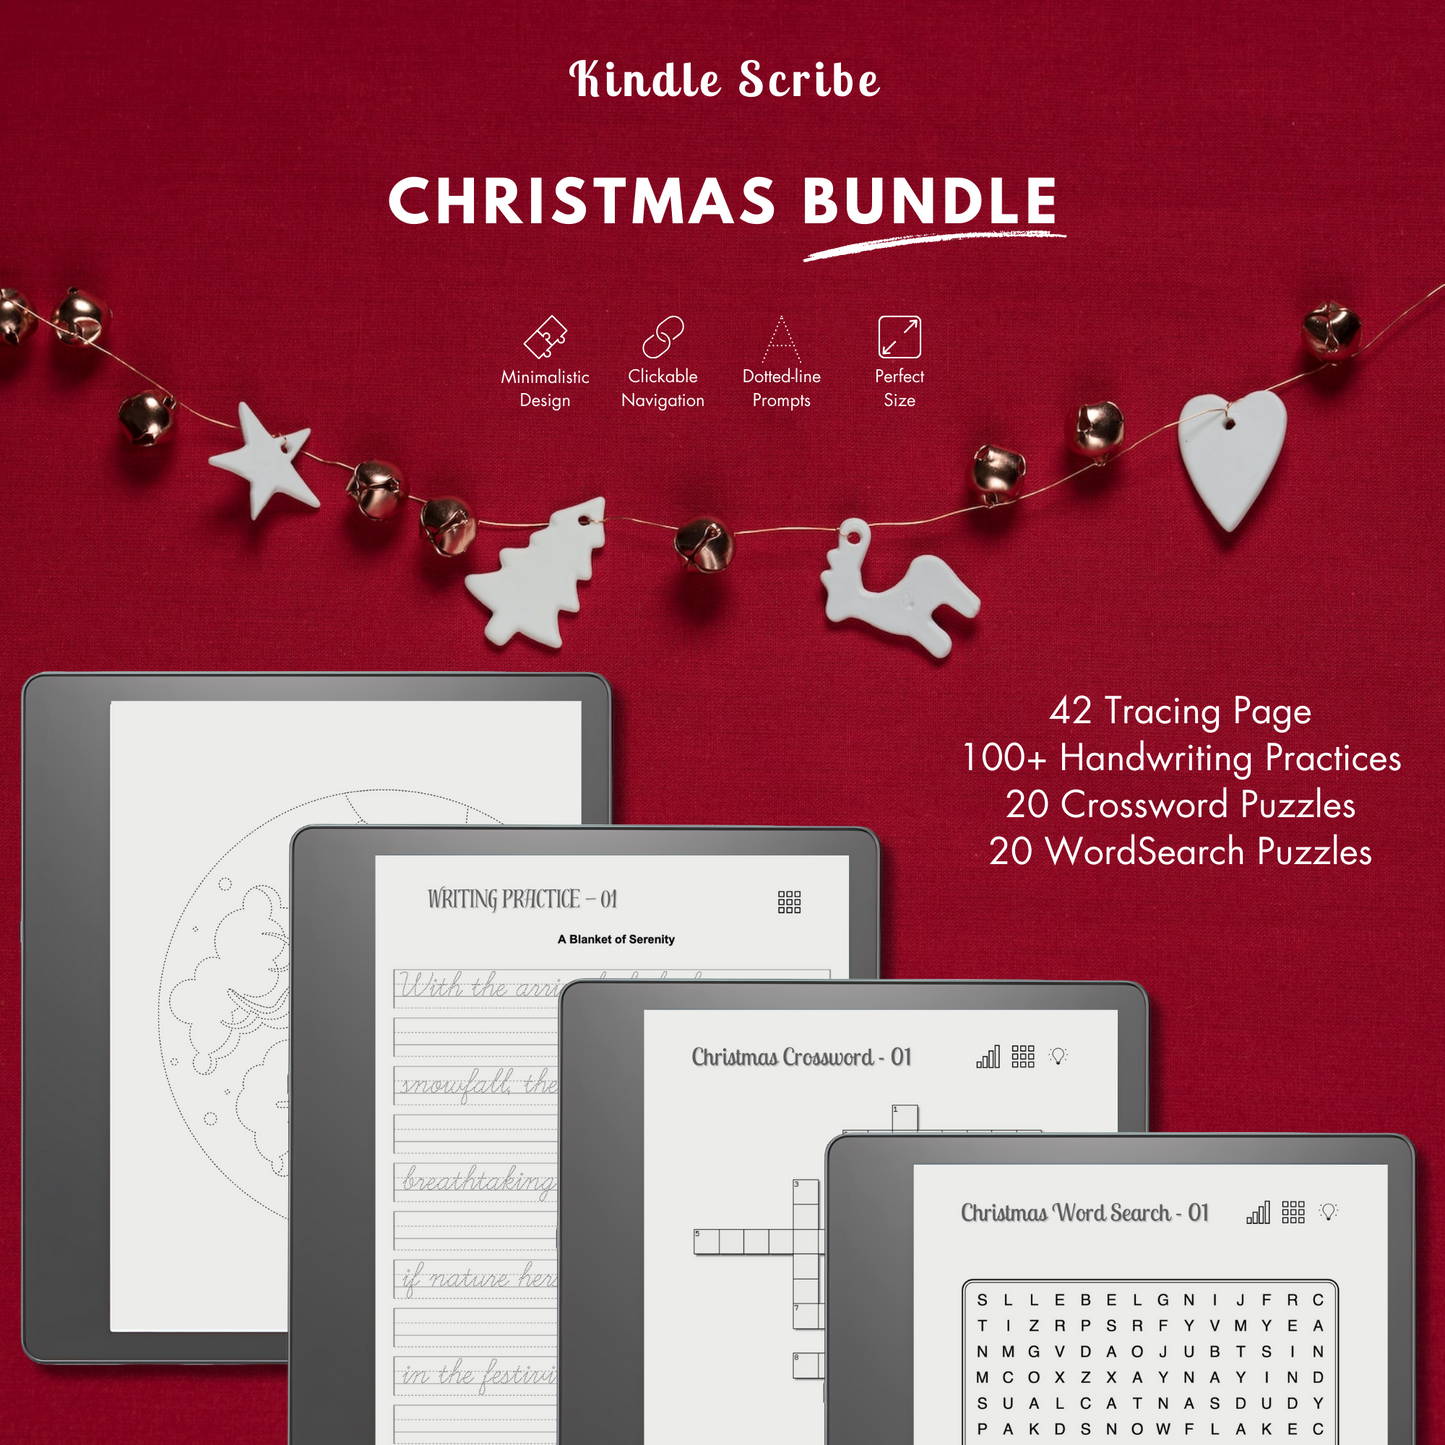 This is a Digital Bundle which includes Christmas Tracing Pages, Christmas Handwriting Practices, Christmas Crossword Puzzles, and Christmas Word Search Challenges tailored for Kindle Scribe.